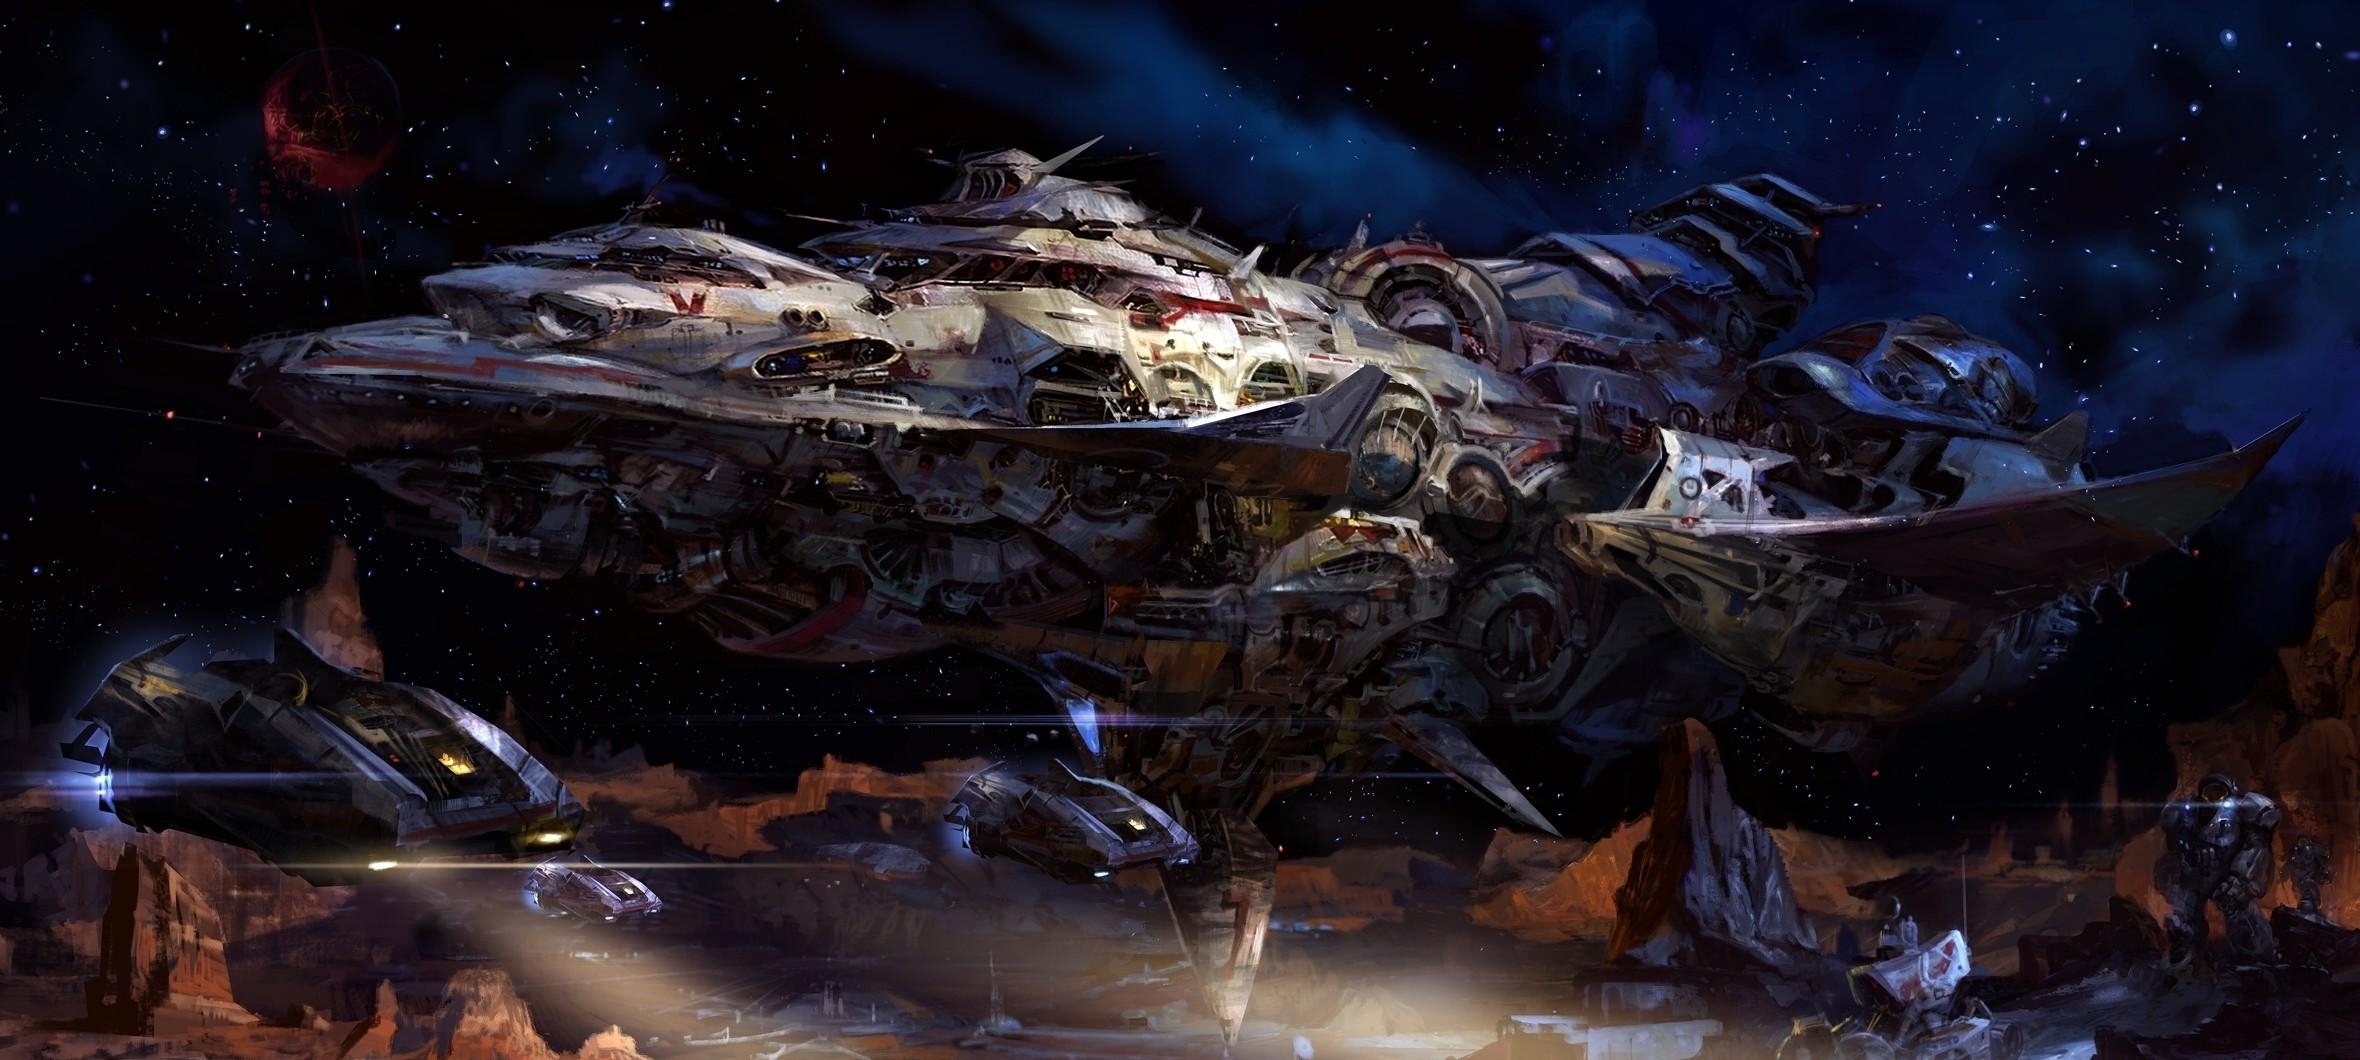 starship, universe, planet, fantasy collection of HD images